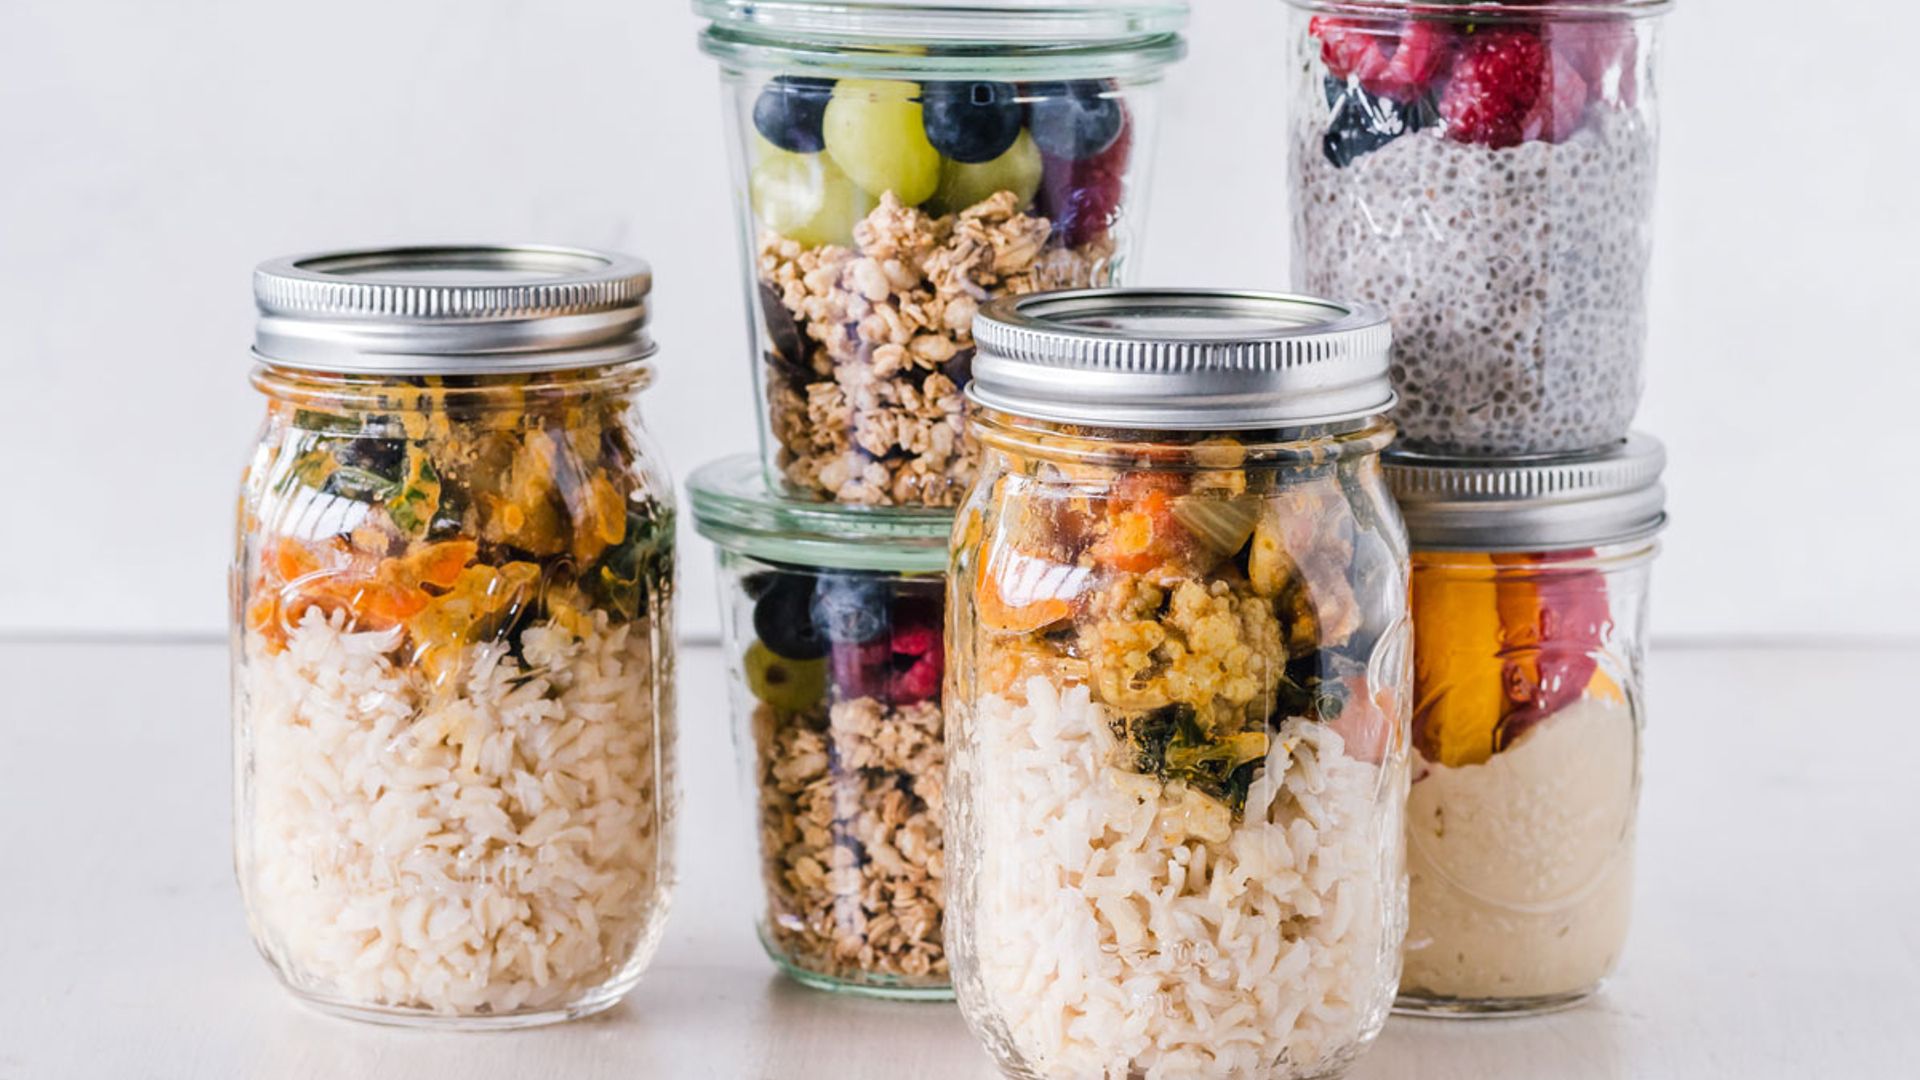 How to meal prep: 3 easy steps to plan your meals like a pro